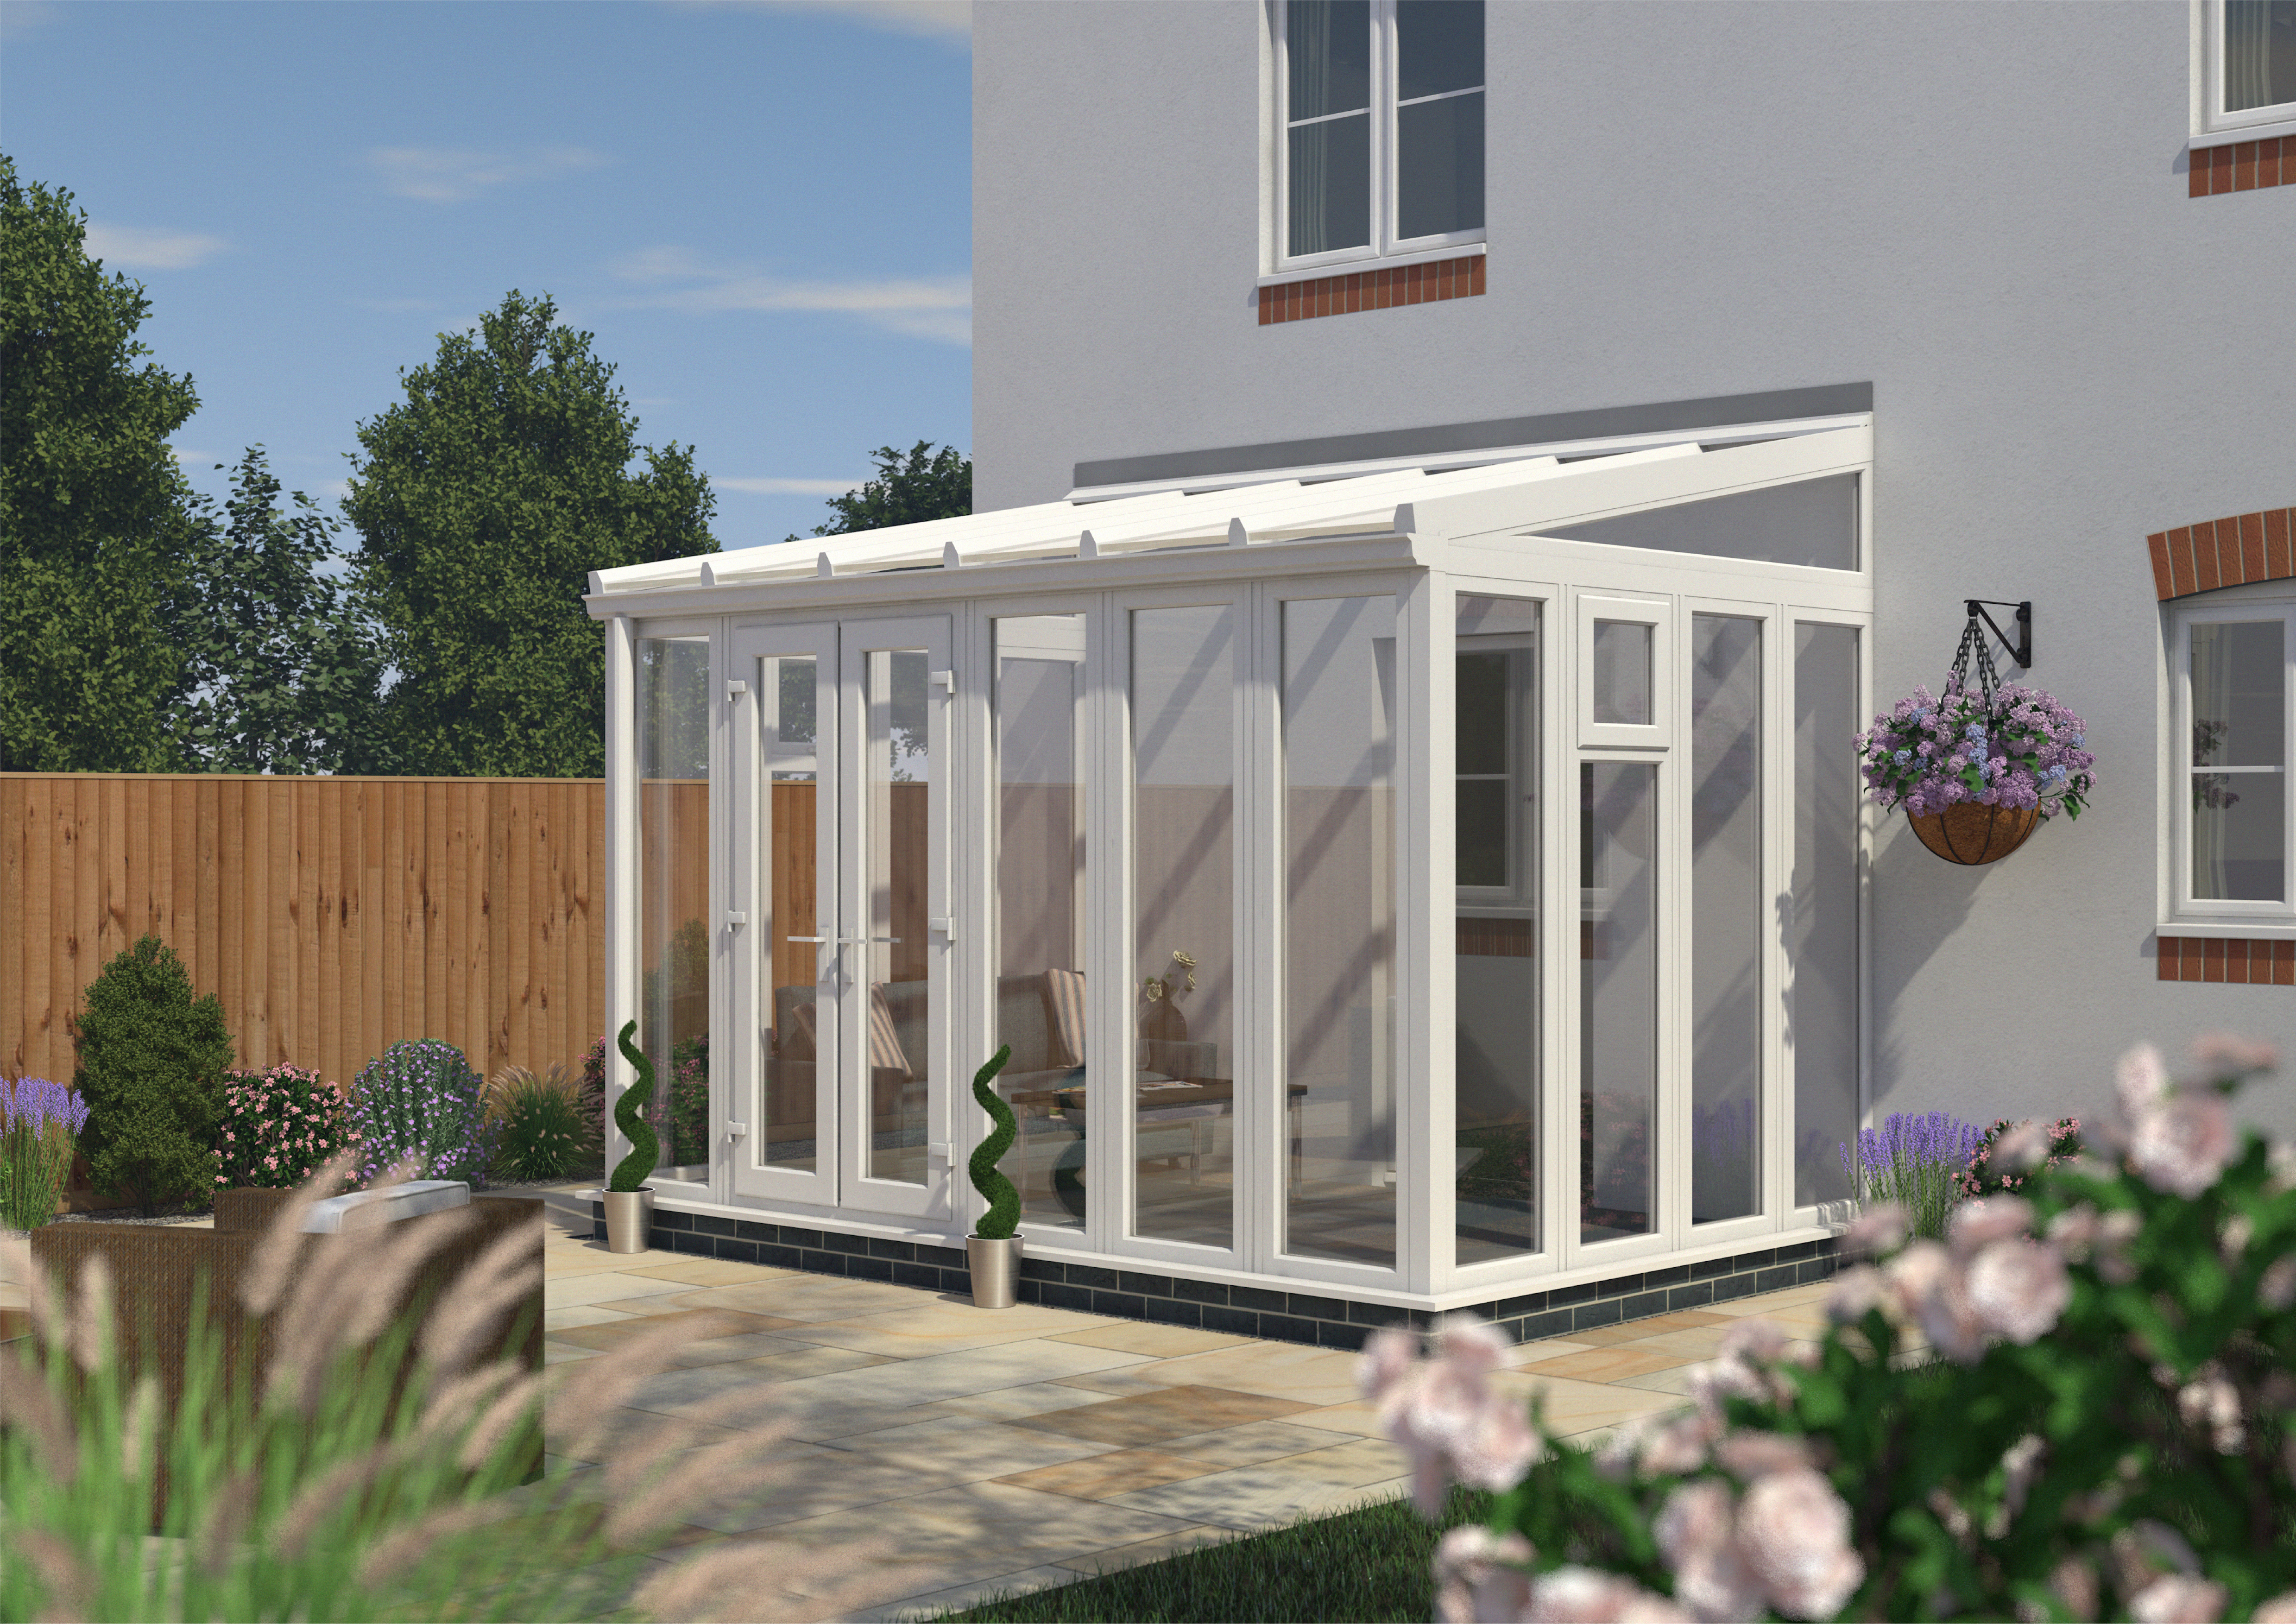 Image of Euramax Lean To Conservatory Full Height - White - 12 ft x 8ft